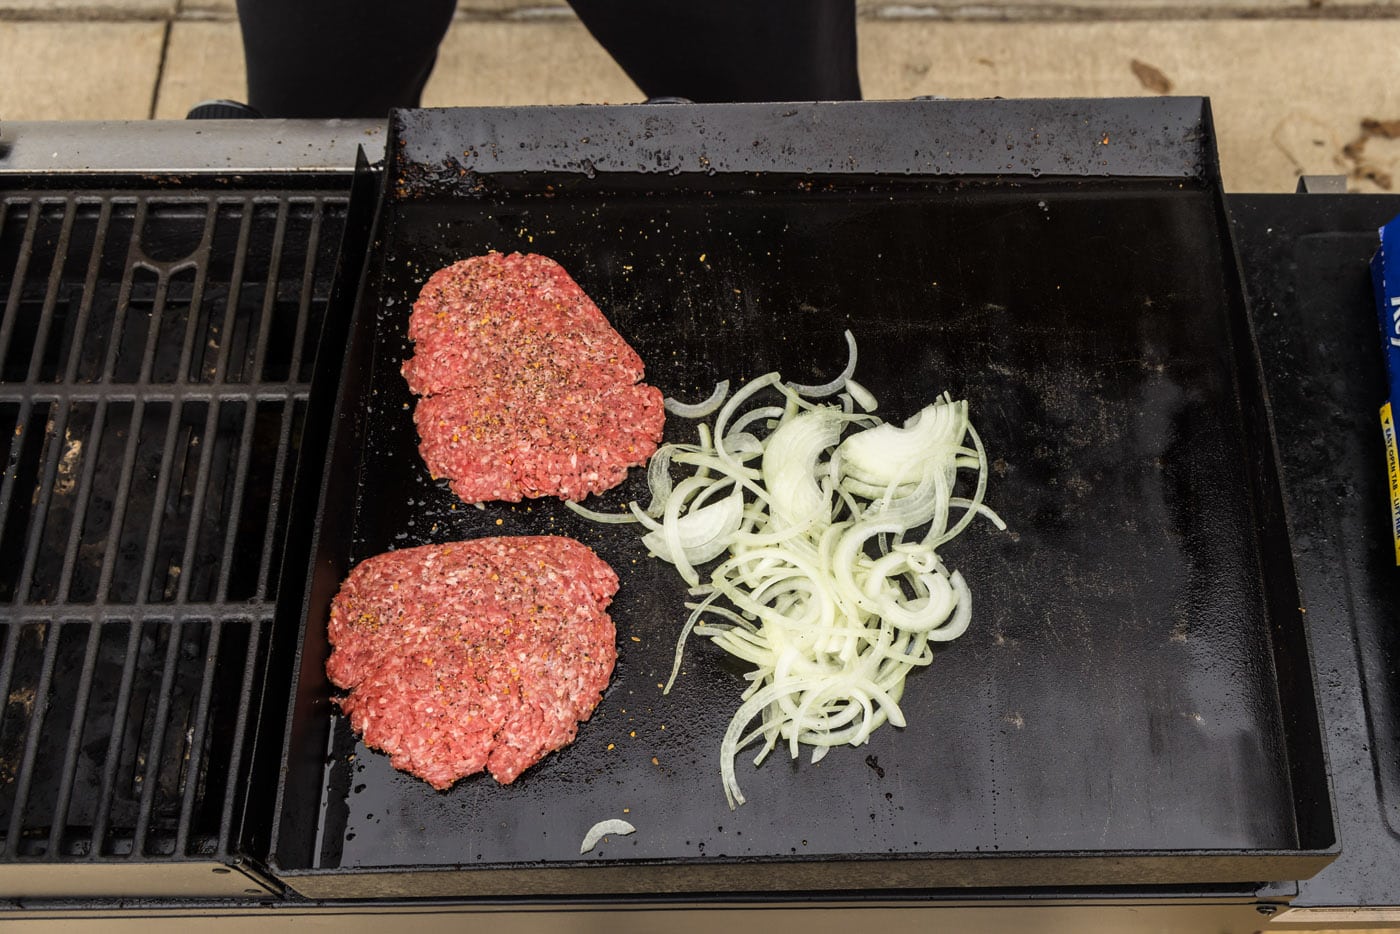 sliced onions cooking next to burger patties on a grill